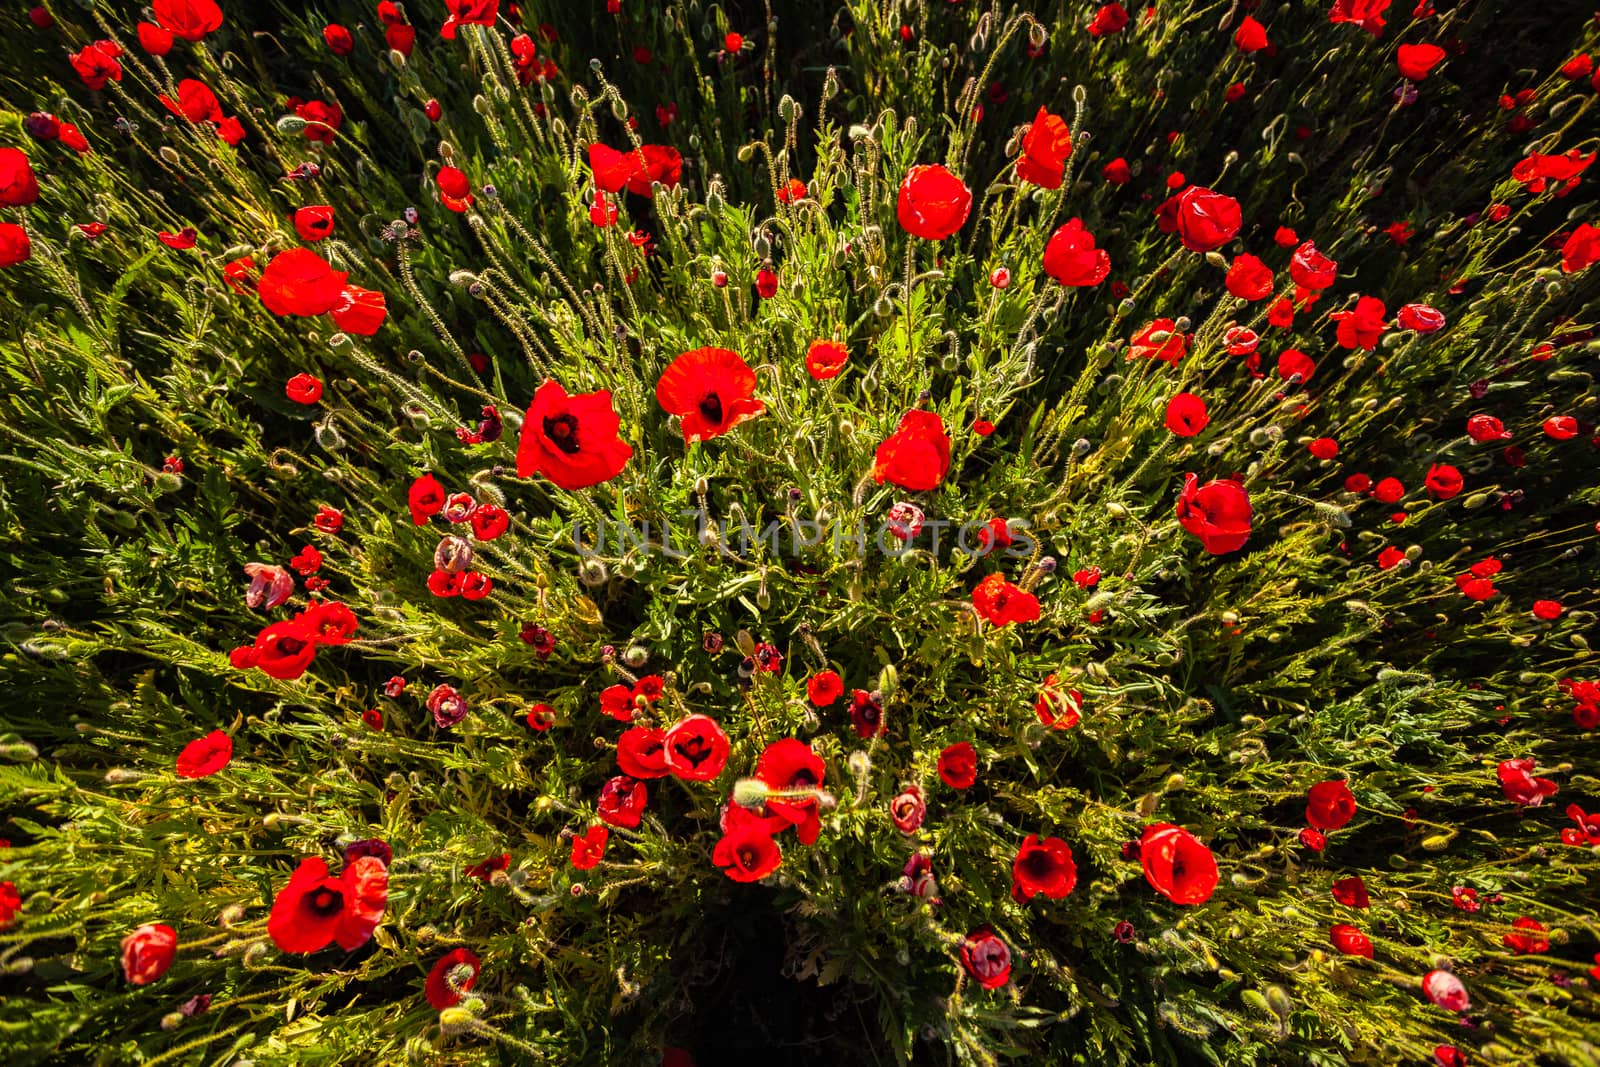 Poppy flower bush of plants from a zenith point of view simulating some kind of exploding sesation